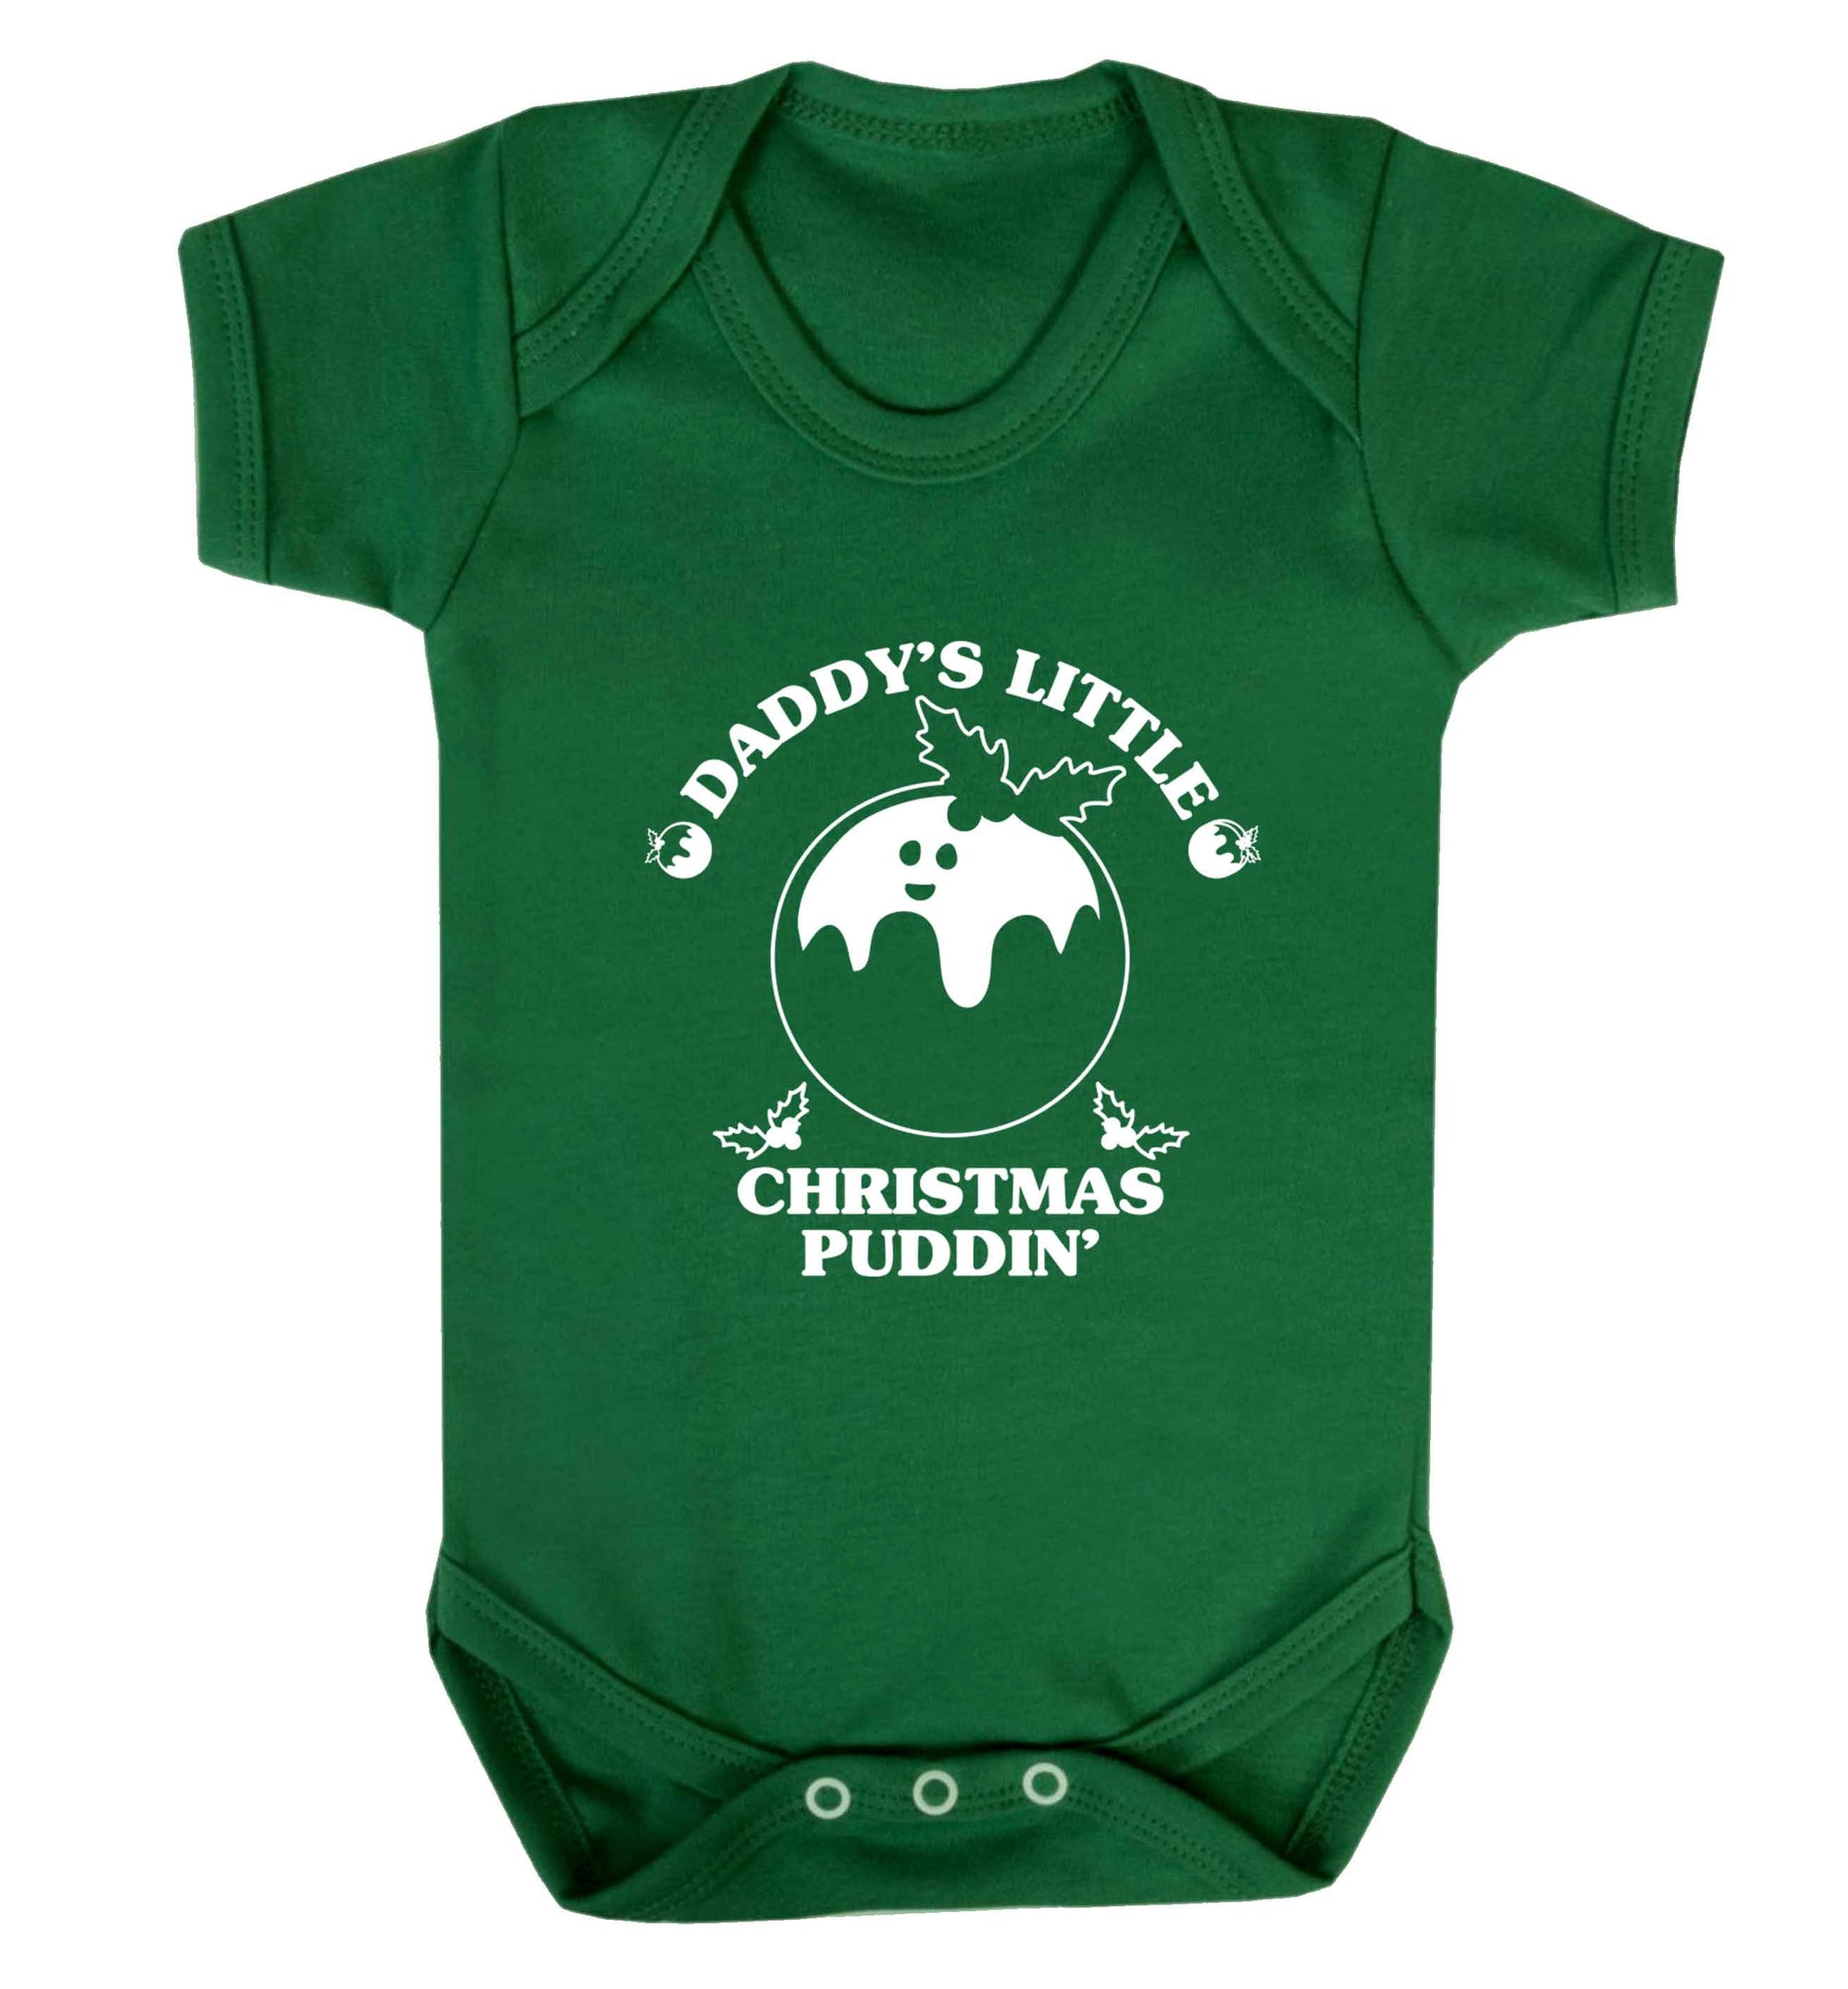 Daddy's little Christmas puddin' Baby Vest green 18-24 months